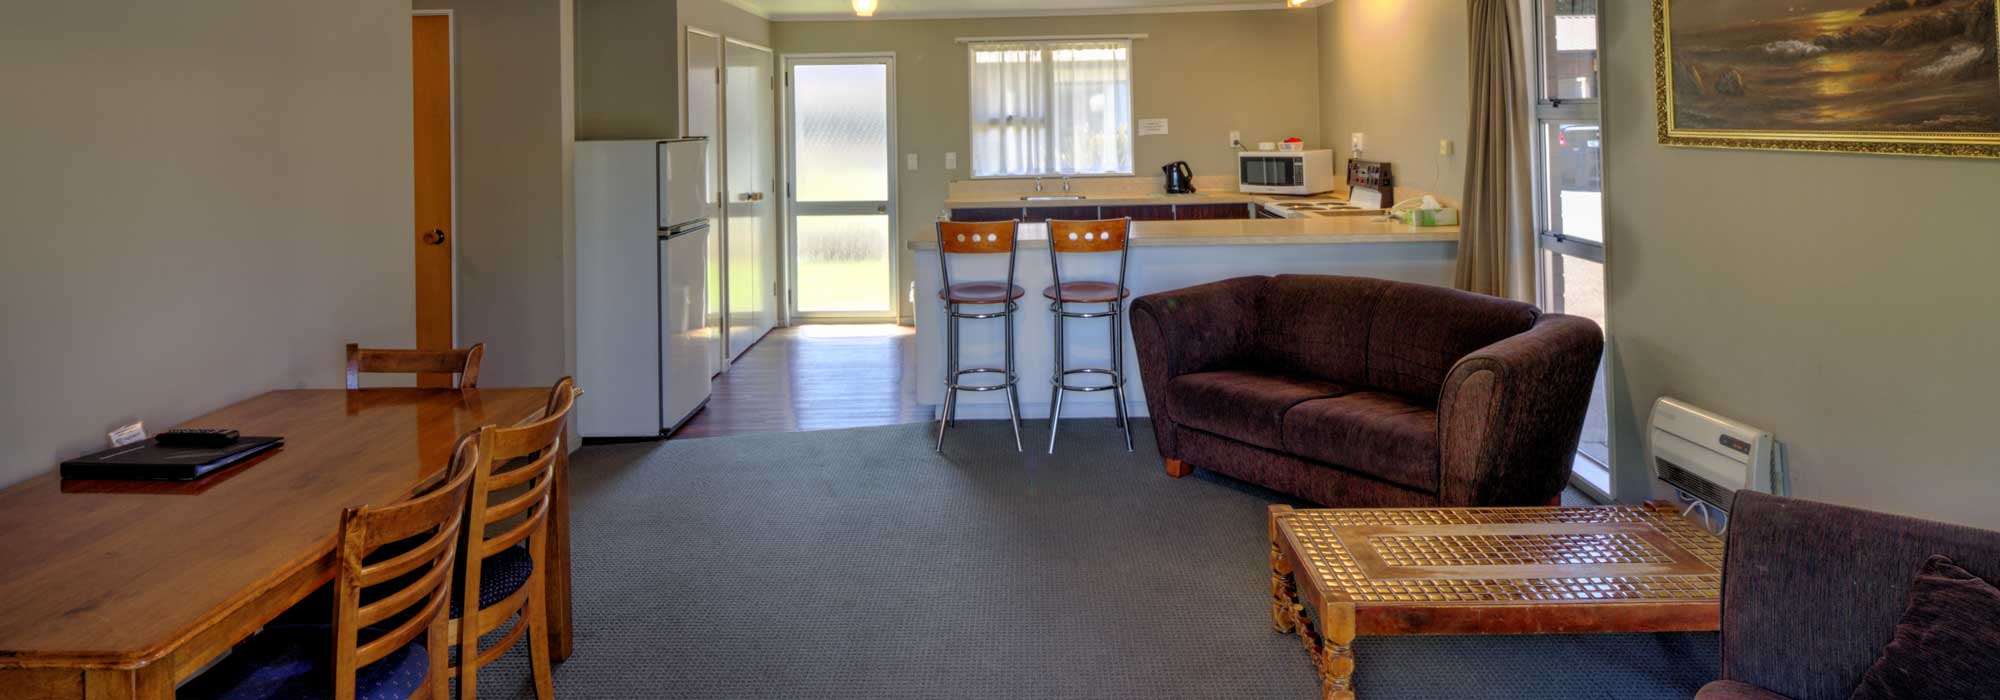 Brightwater accommodation, between Nelson & Nelson Lakes